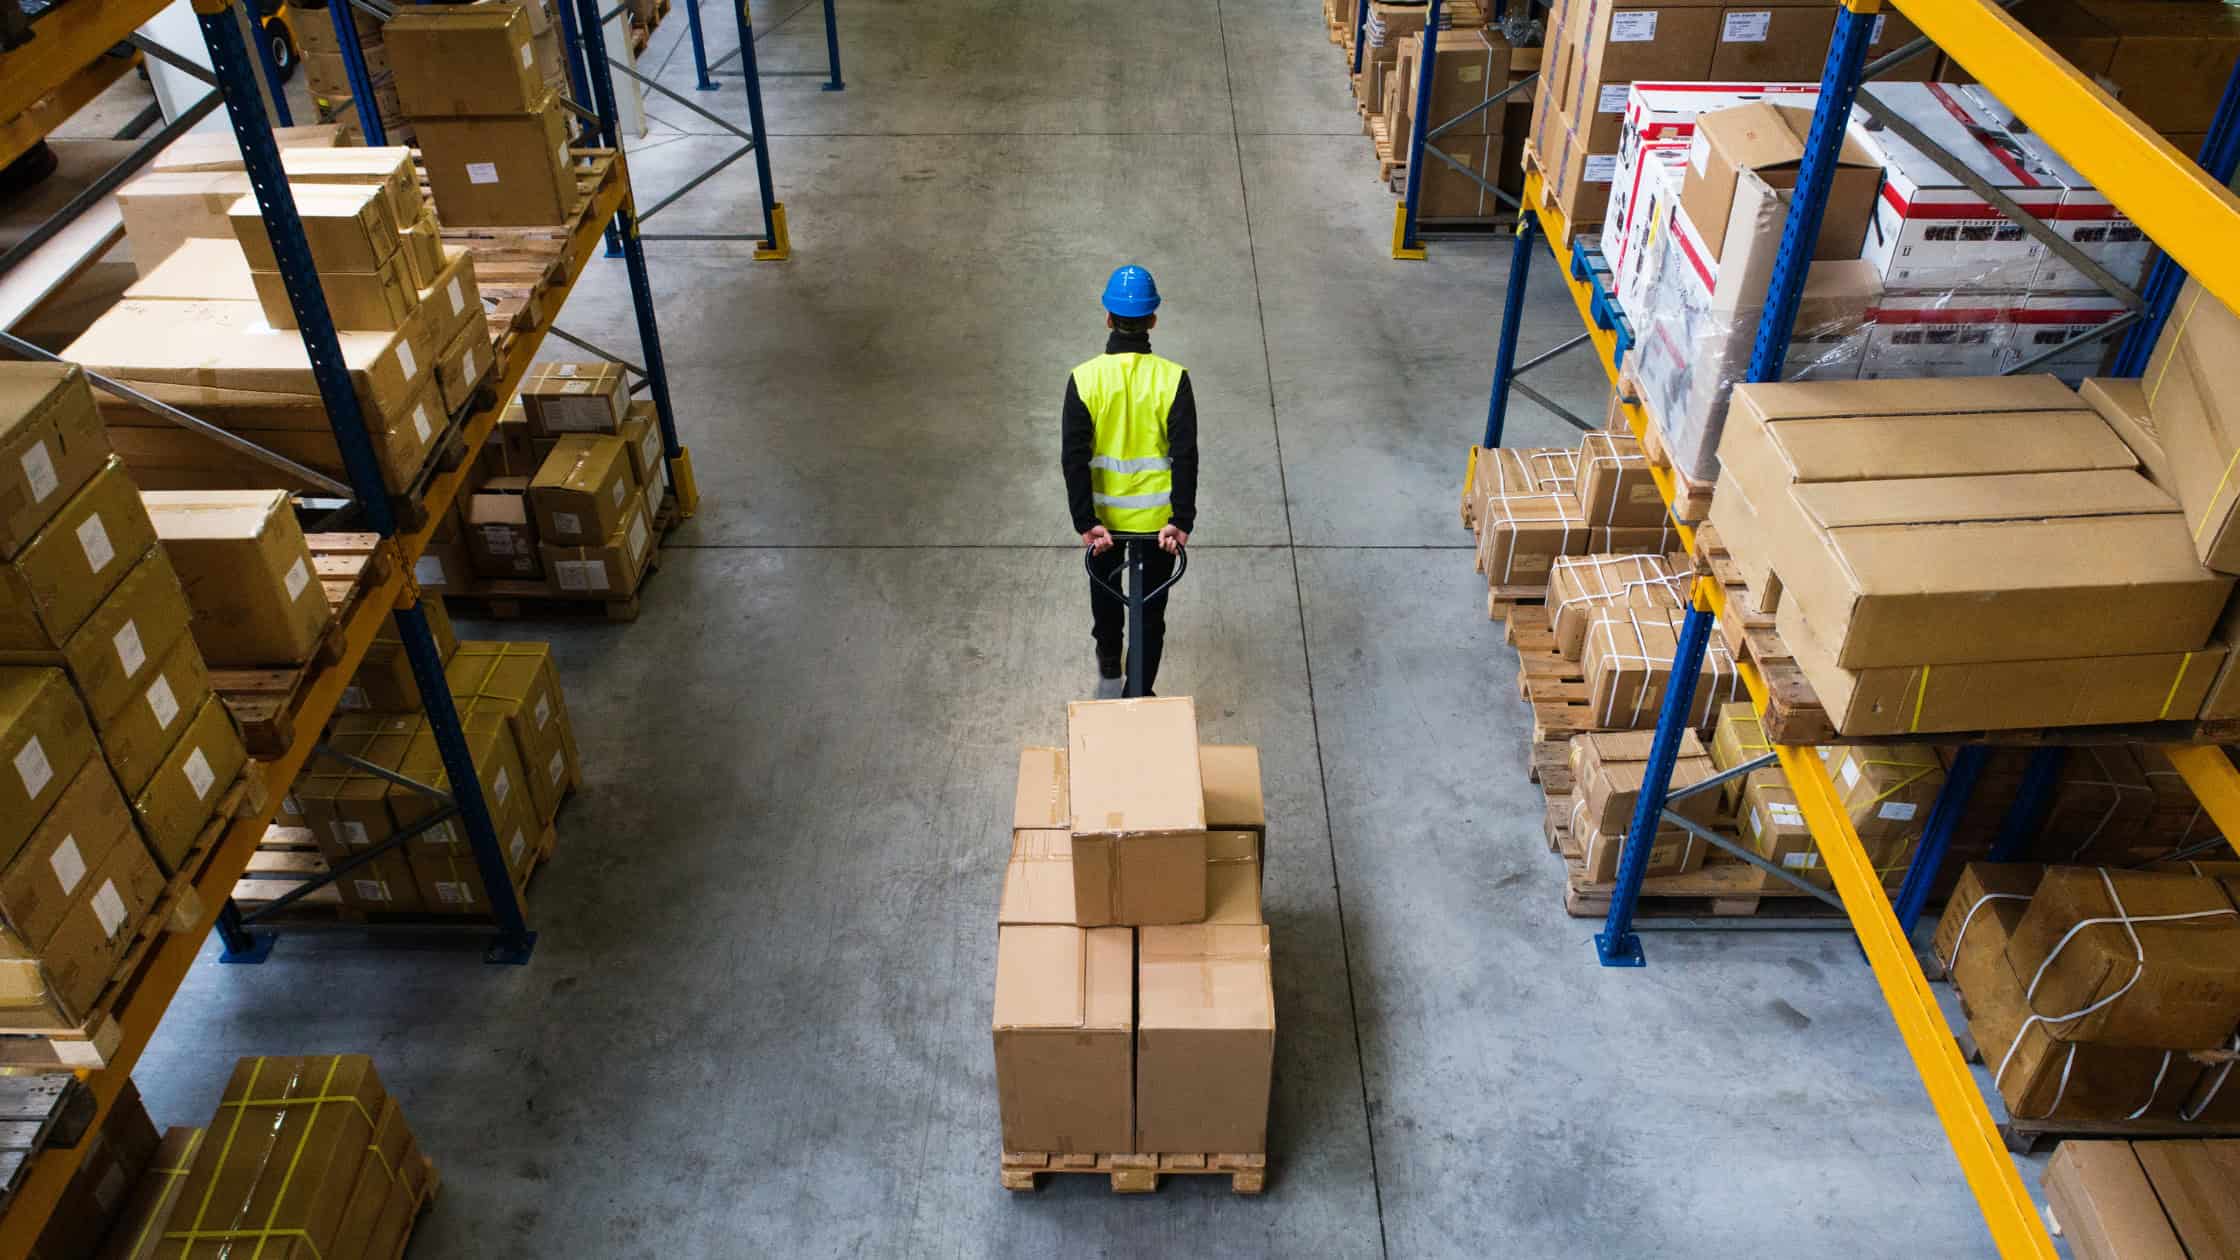 Warehouse worker and how to prevent ergonomic or repetitive motion injury